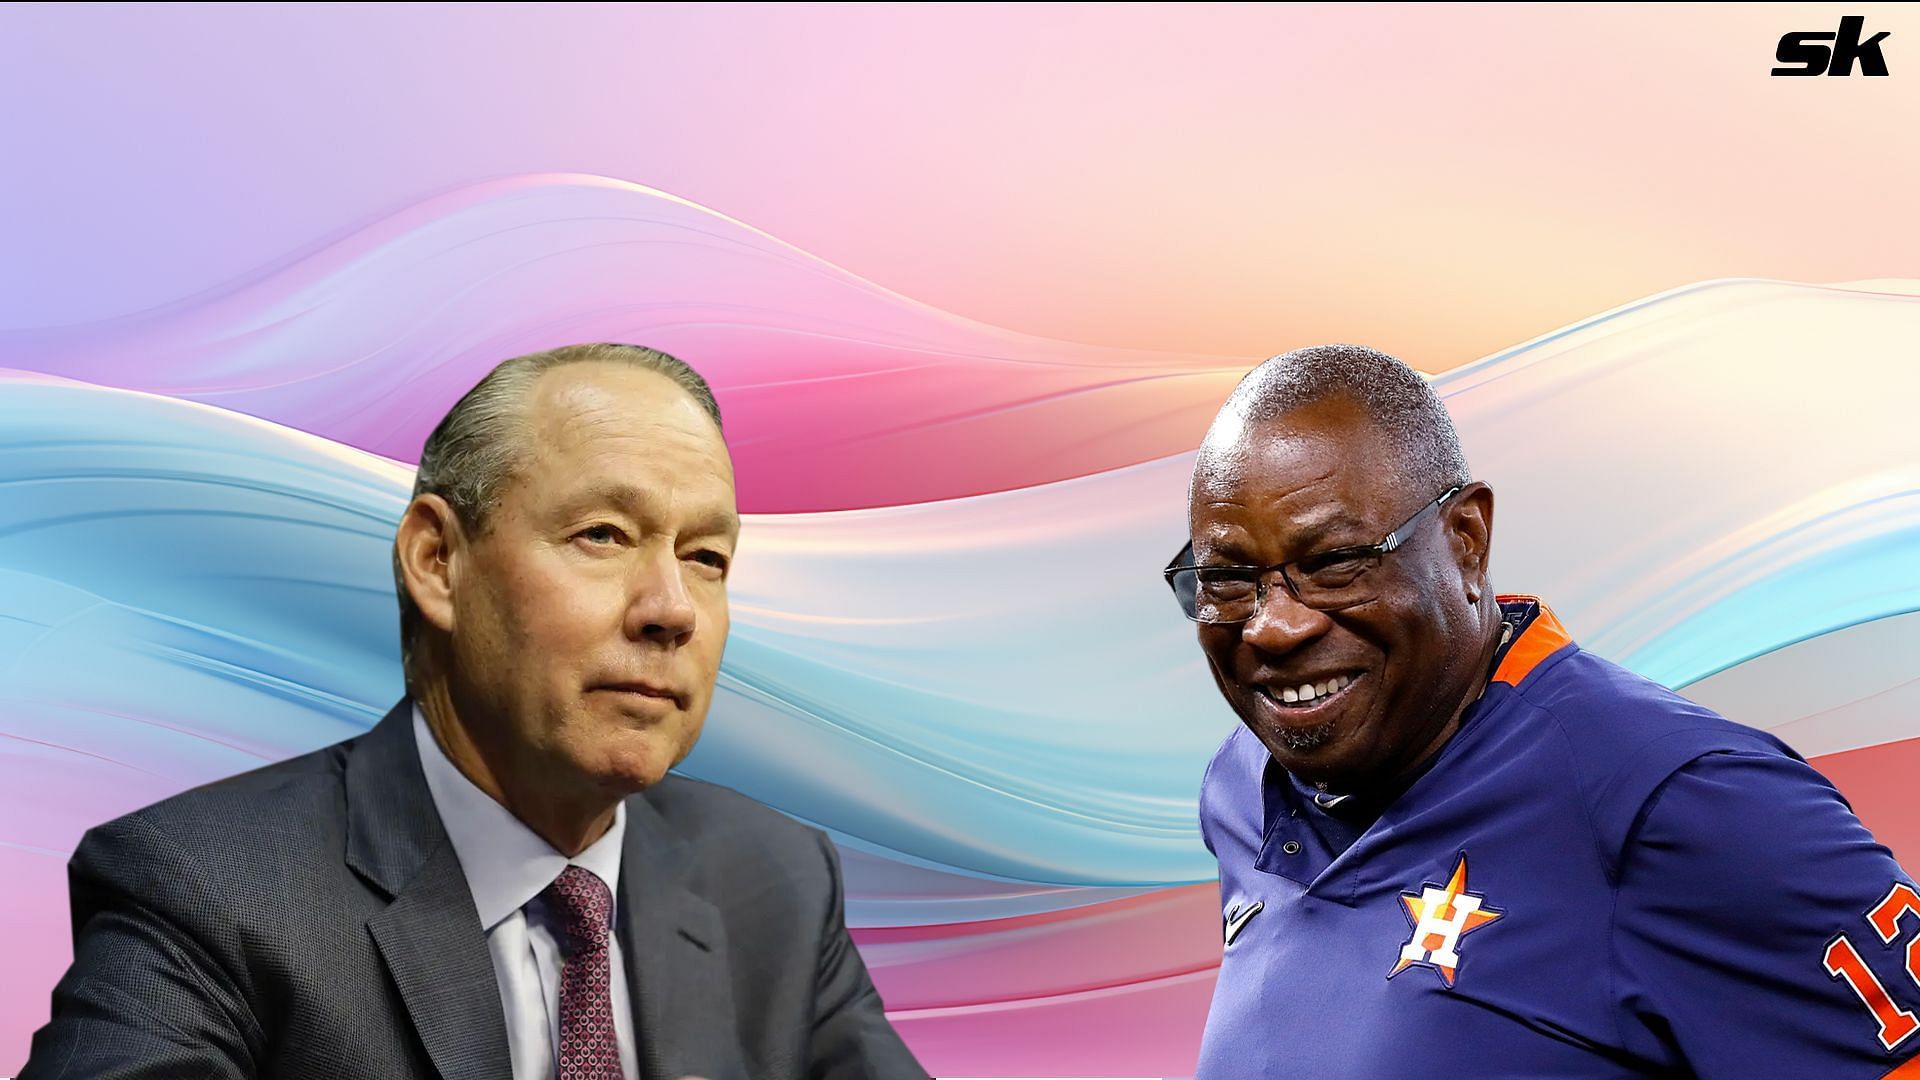 Astros owner Jim Crane bid emotional farewell to Dusty Baker following manager